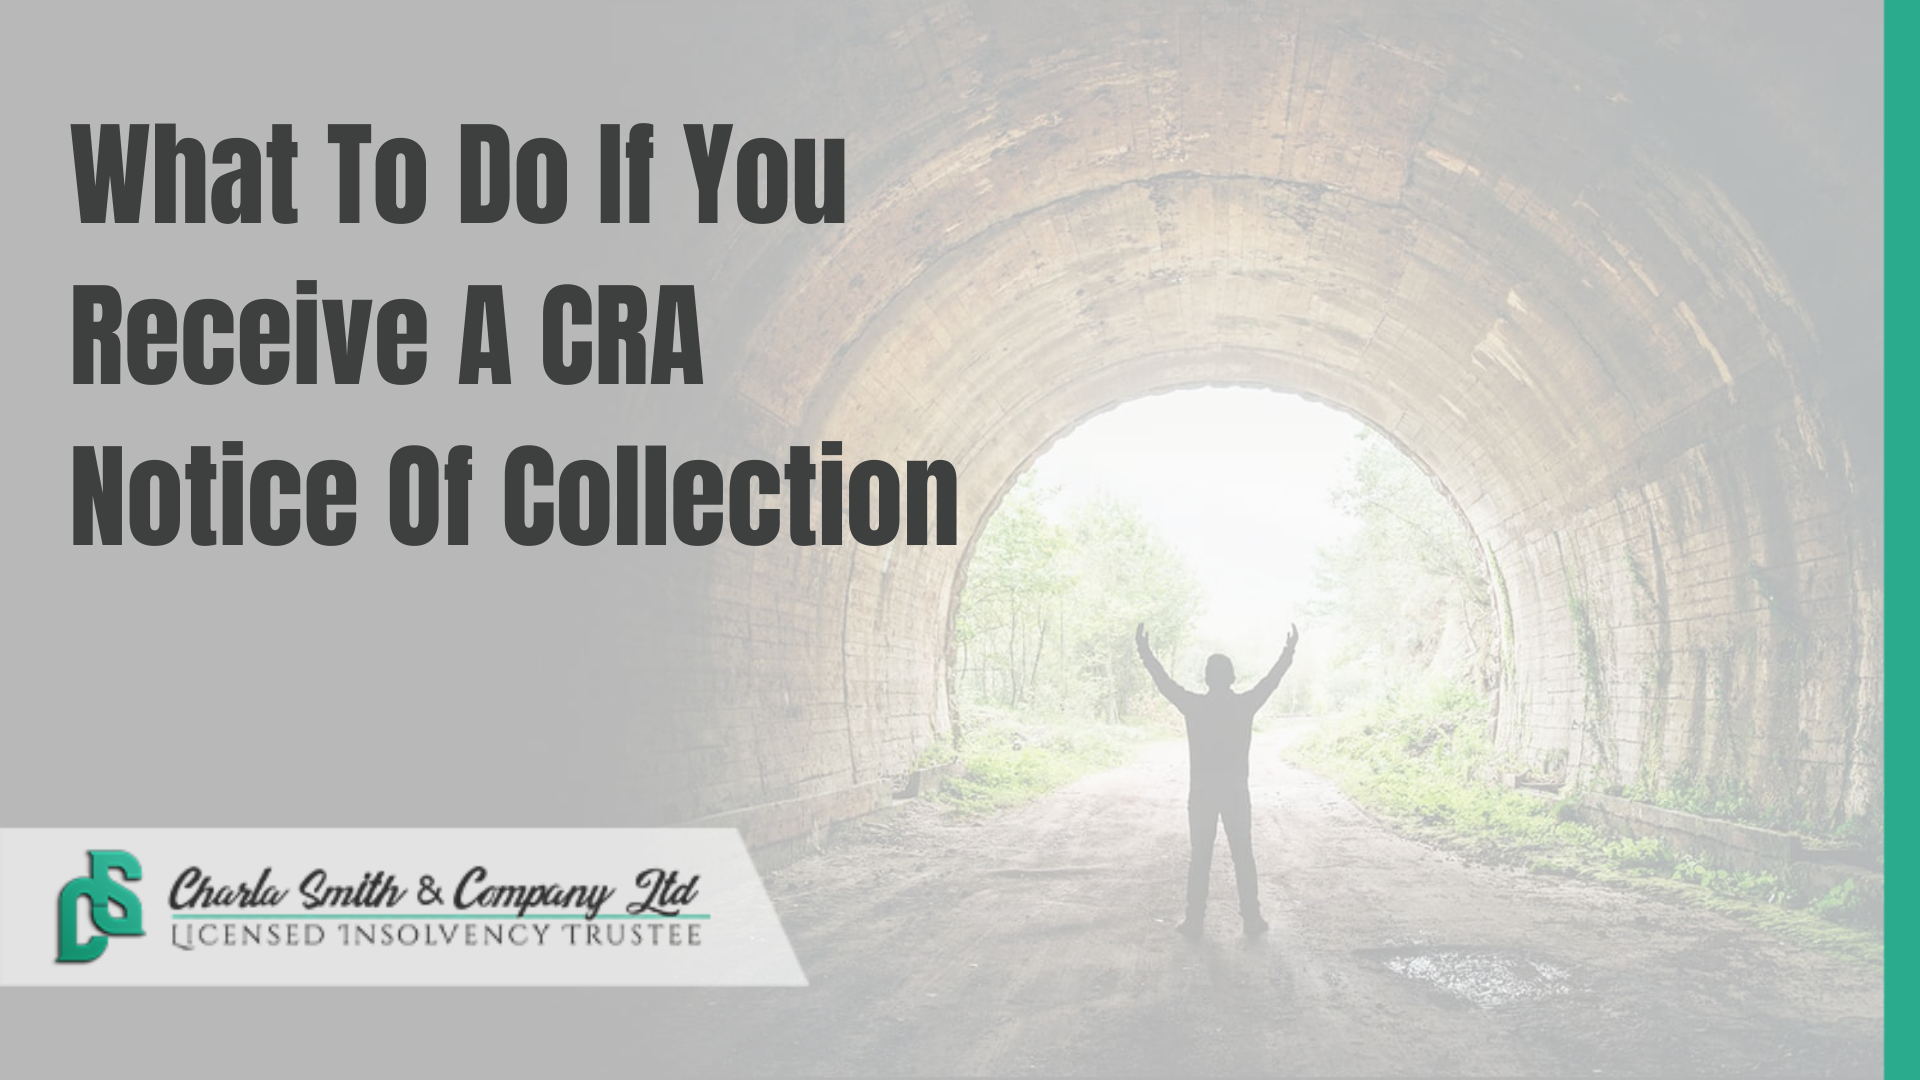 What To Do If You Receive A CRA Notice Of Collection